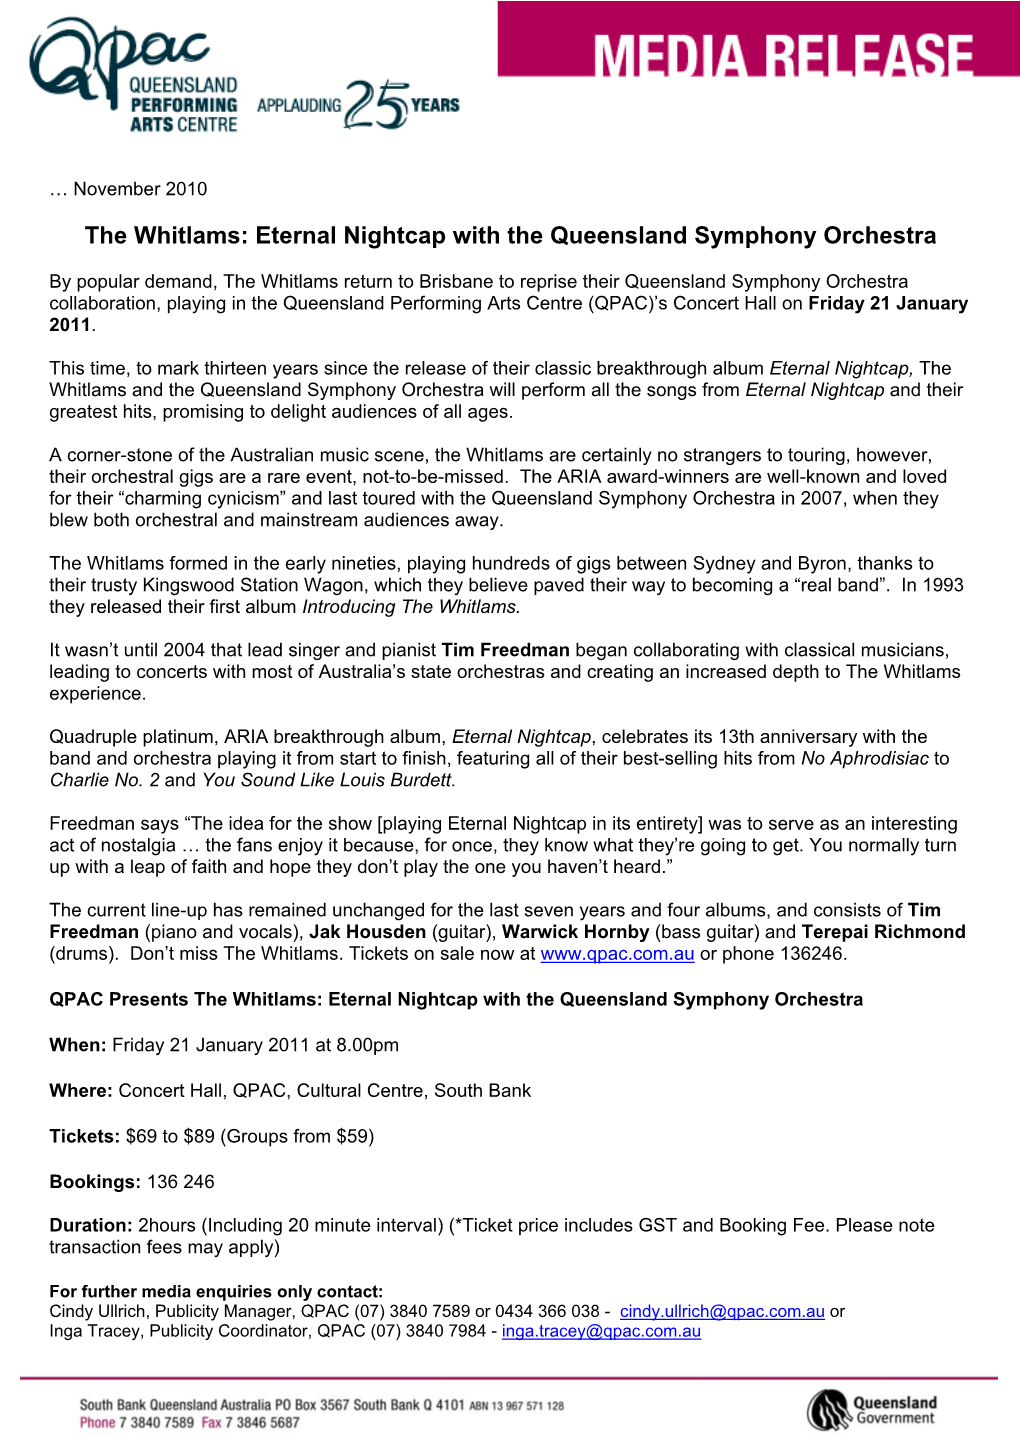 The Whitlams: Eternal Nightcap with the Queensland Symphony Orchestra